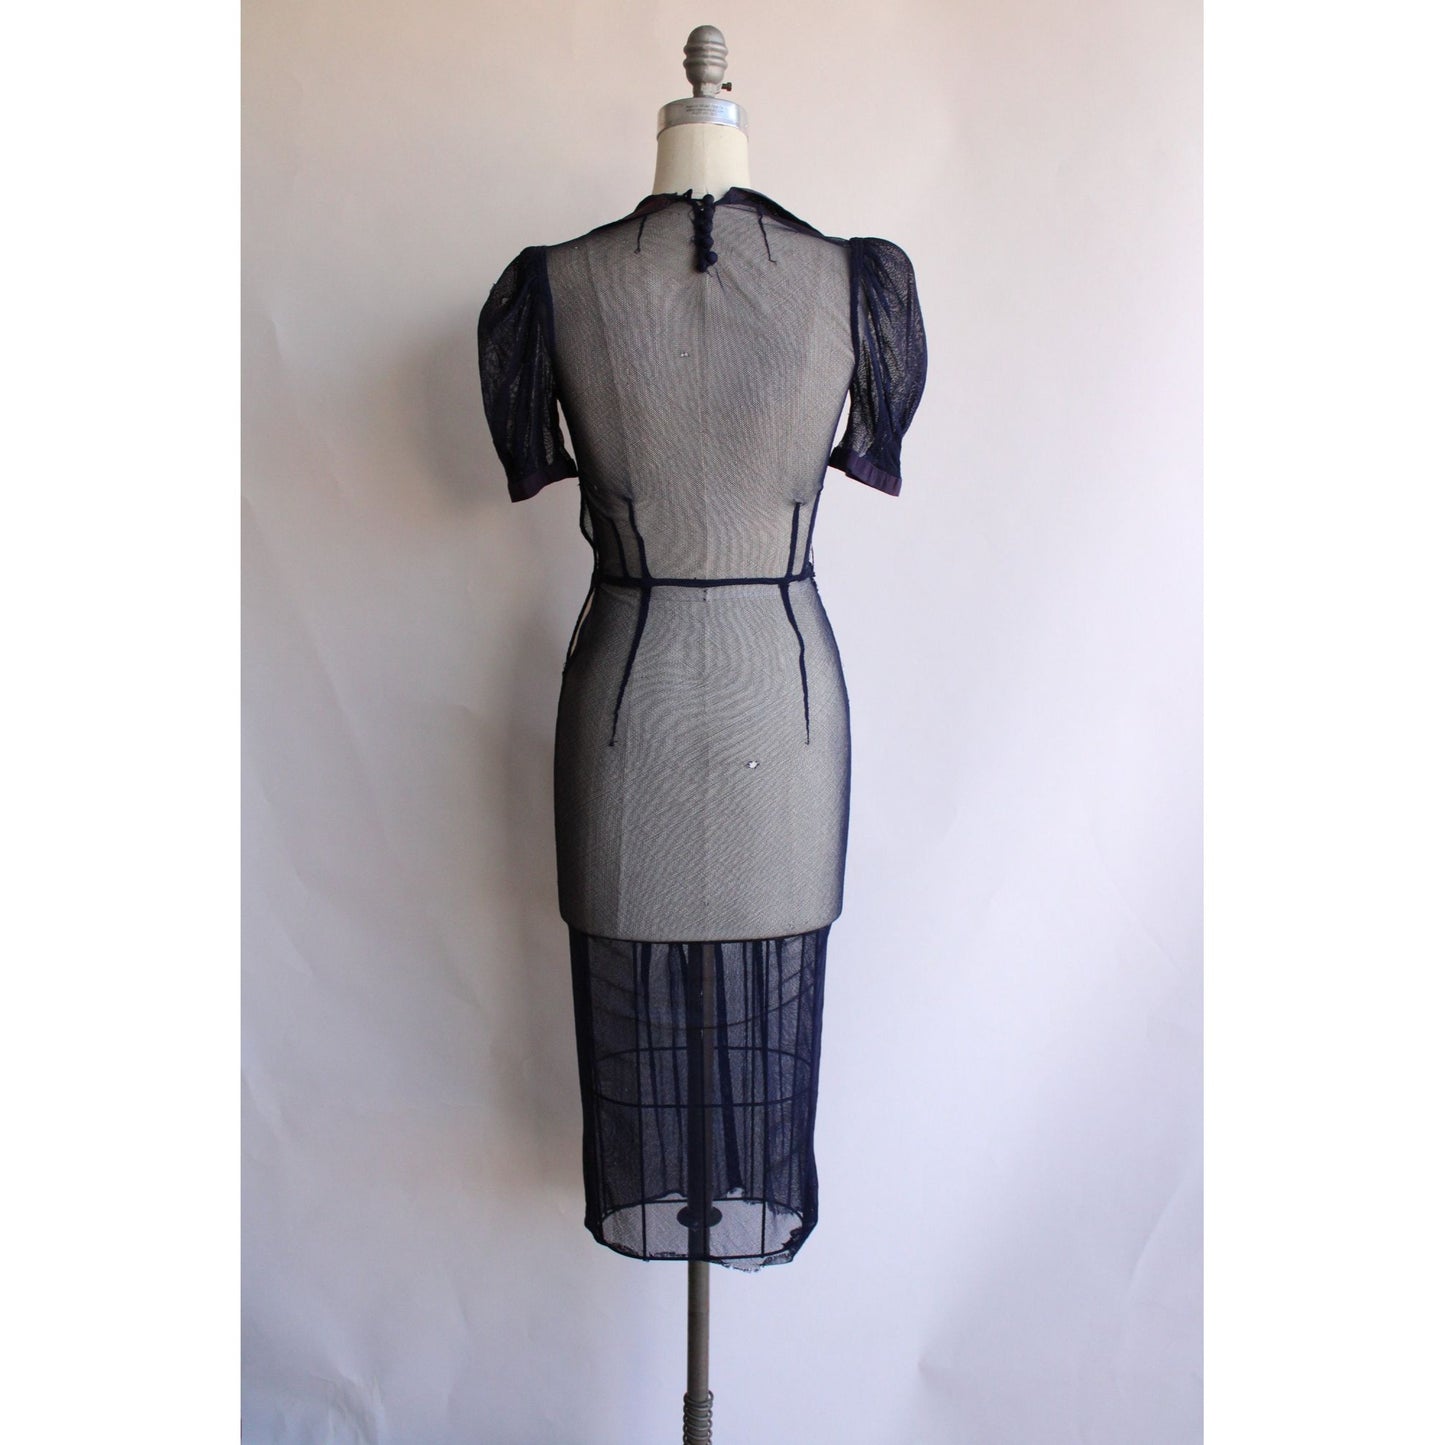 Vintage 1930s Navy Blue Tulle Dress with Sailor Collar